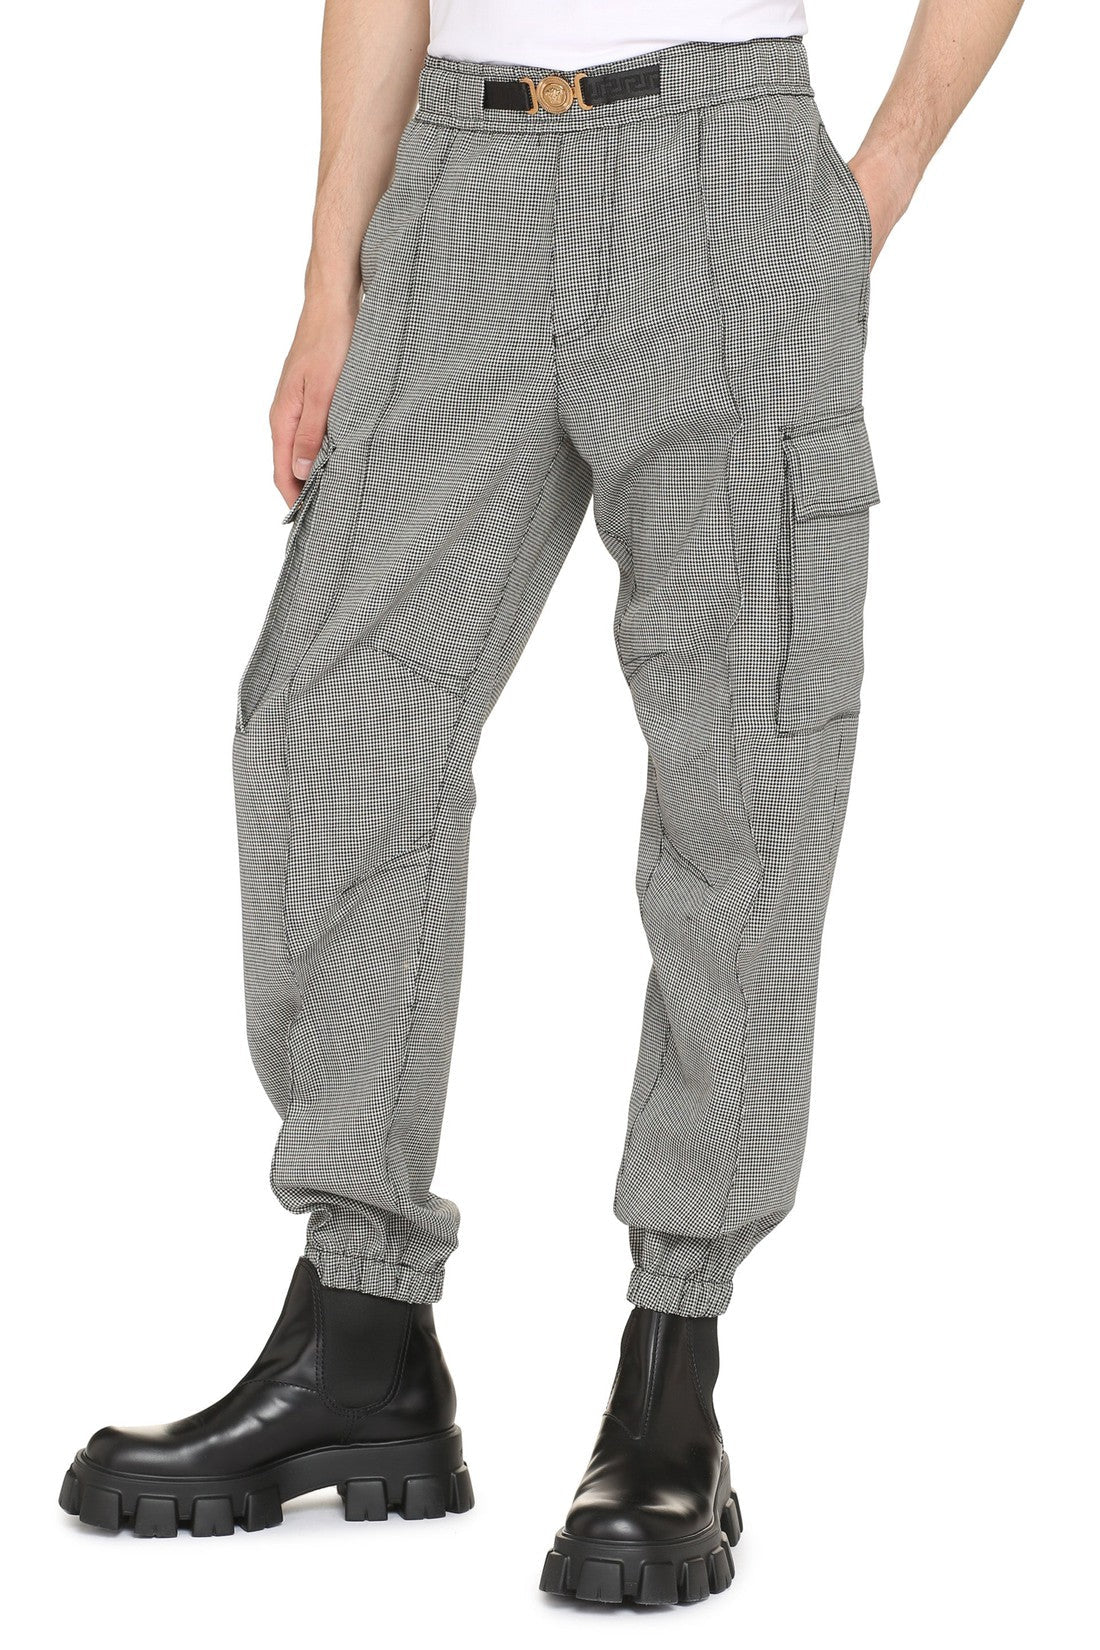 Versace-OUTLET-SALE-Wool cargo trousers-ARCHIVIST